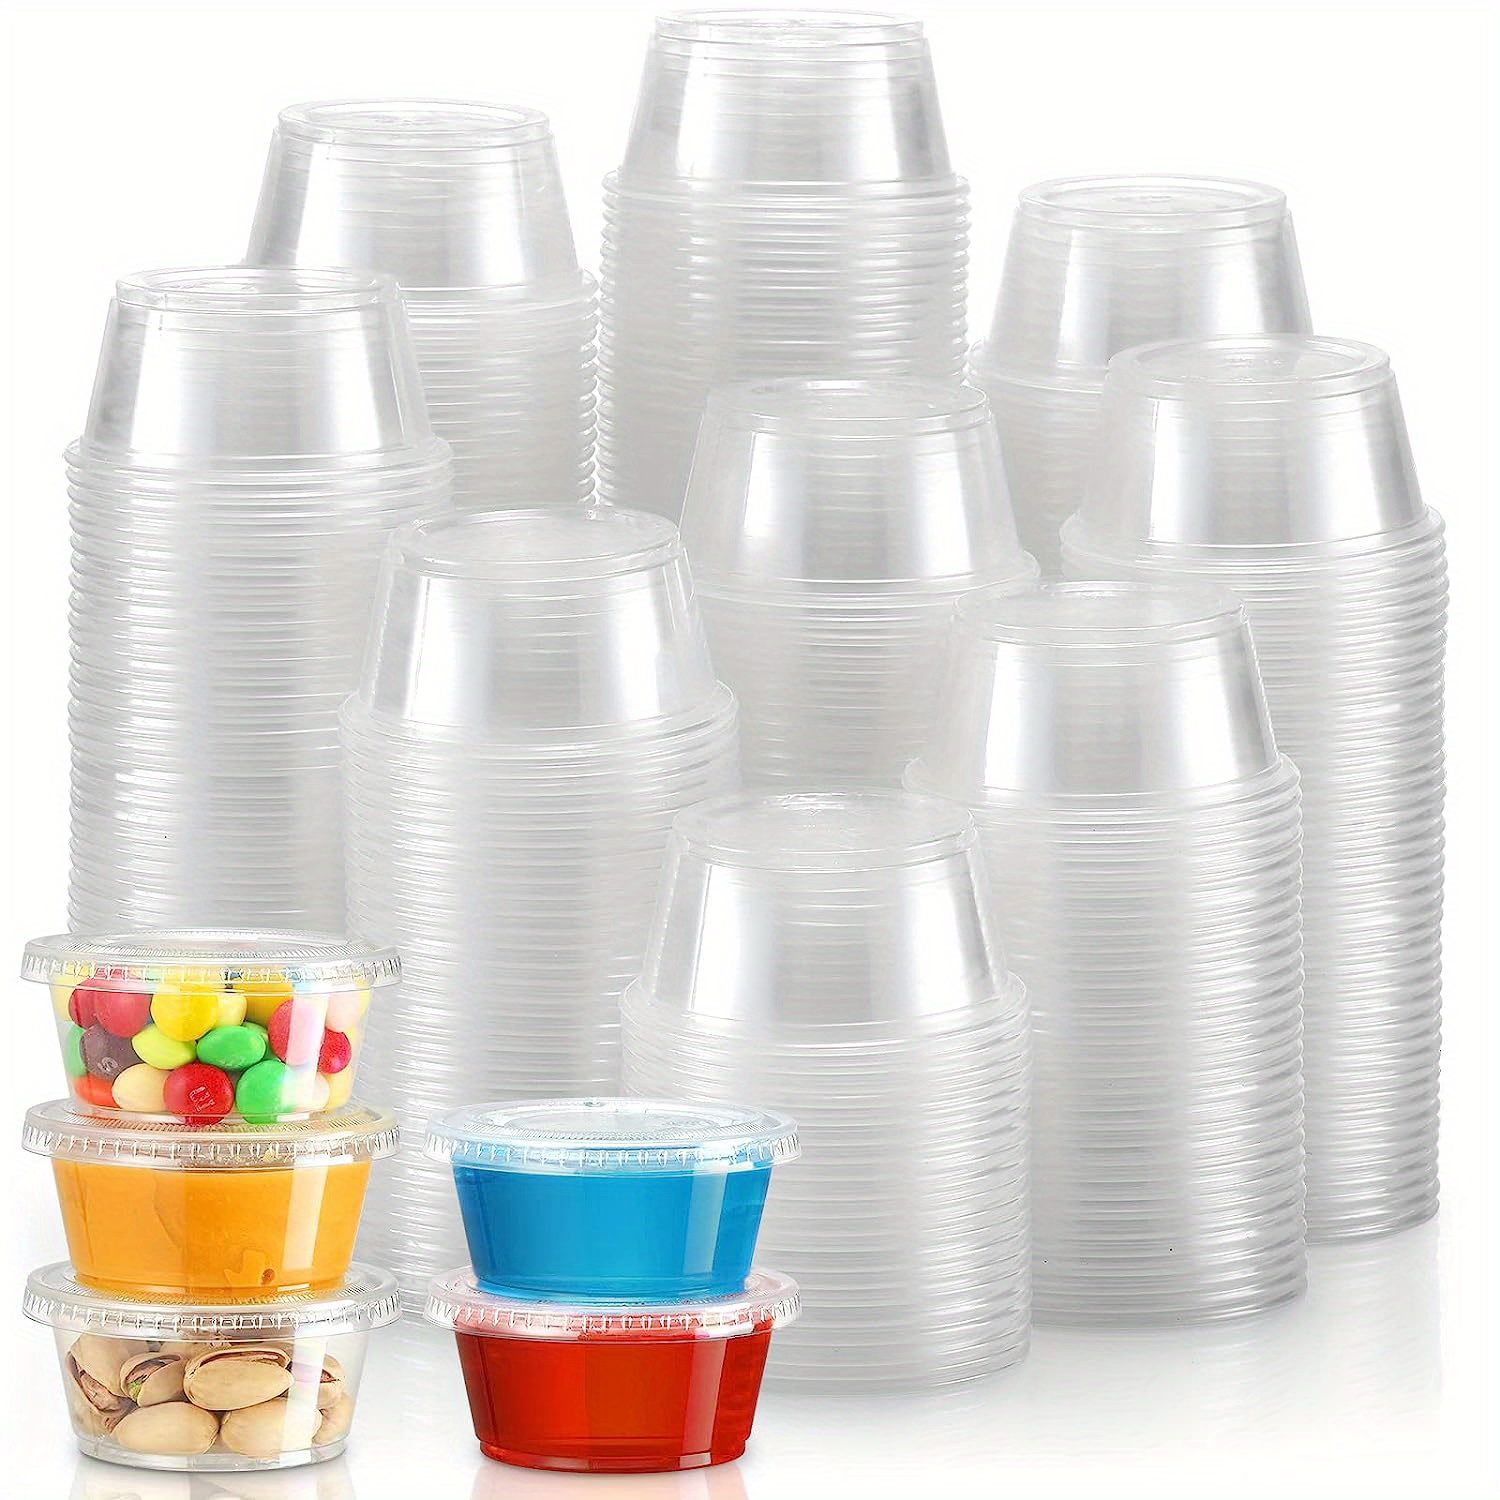 130 Sets - 2 Oz Jello Shot Cups, Small Plastic Containers with Lids,  Airtight and Stackable Portion Cups, Salad Dressing Container, Dipping Sauce  Cups, Condiment Cups for Lunch, Party to Go, Trips 2oz - 130